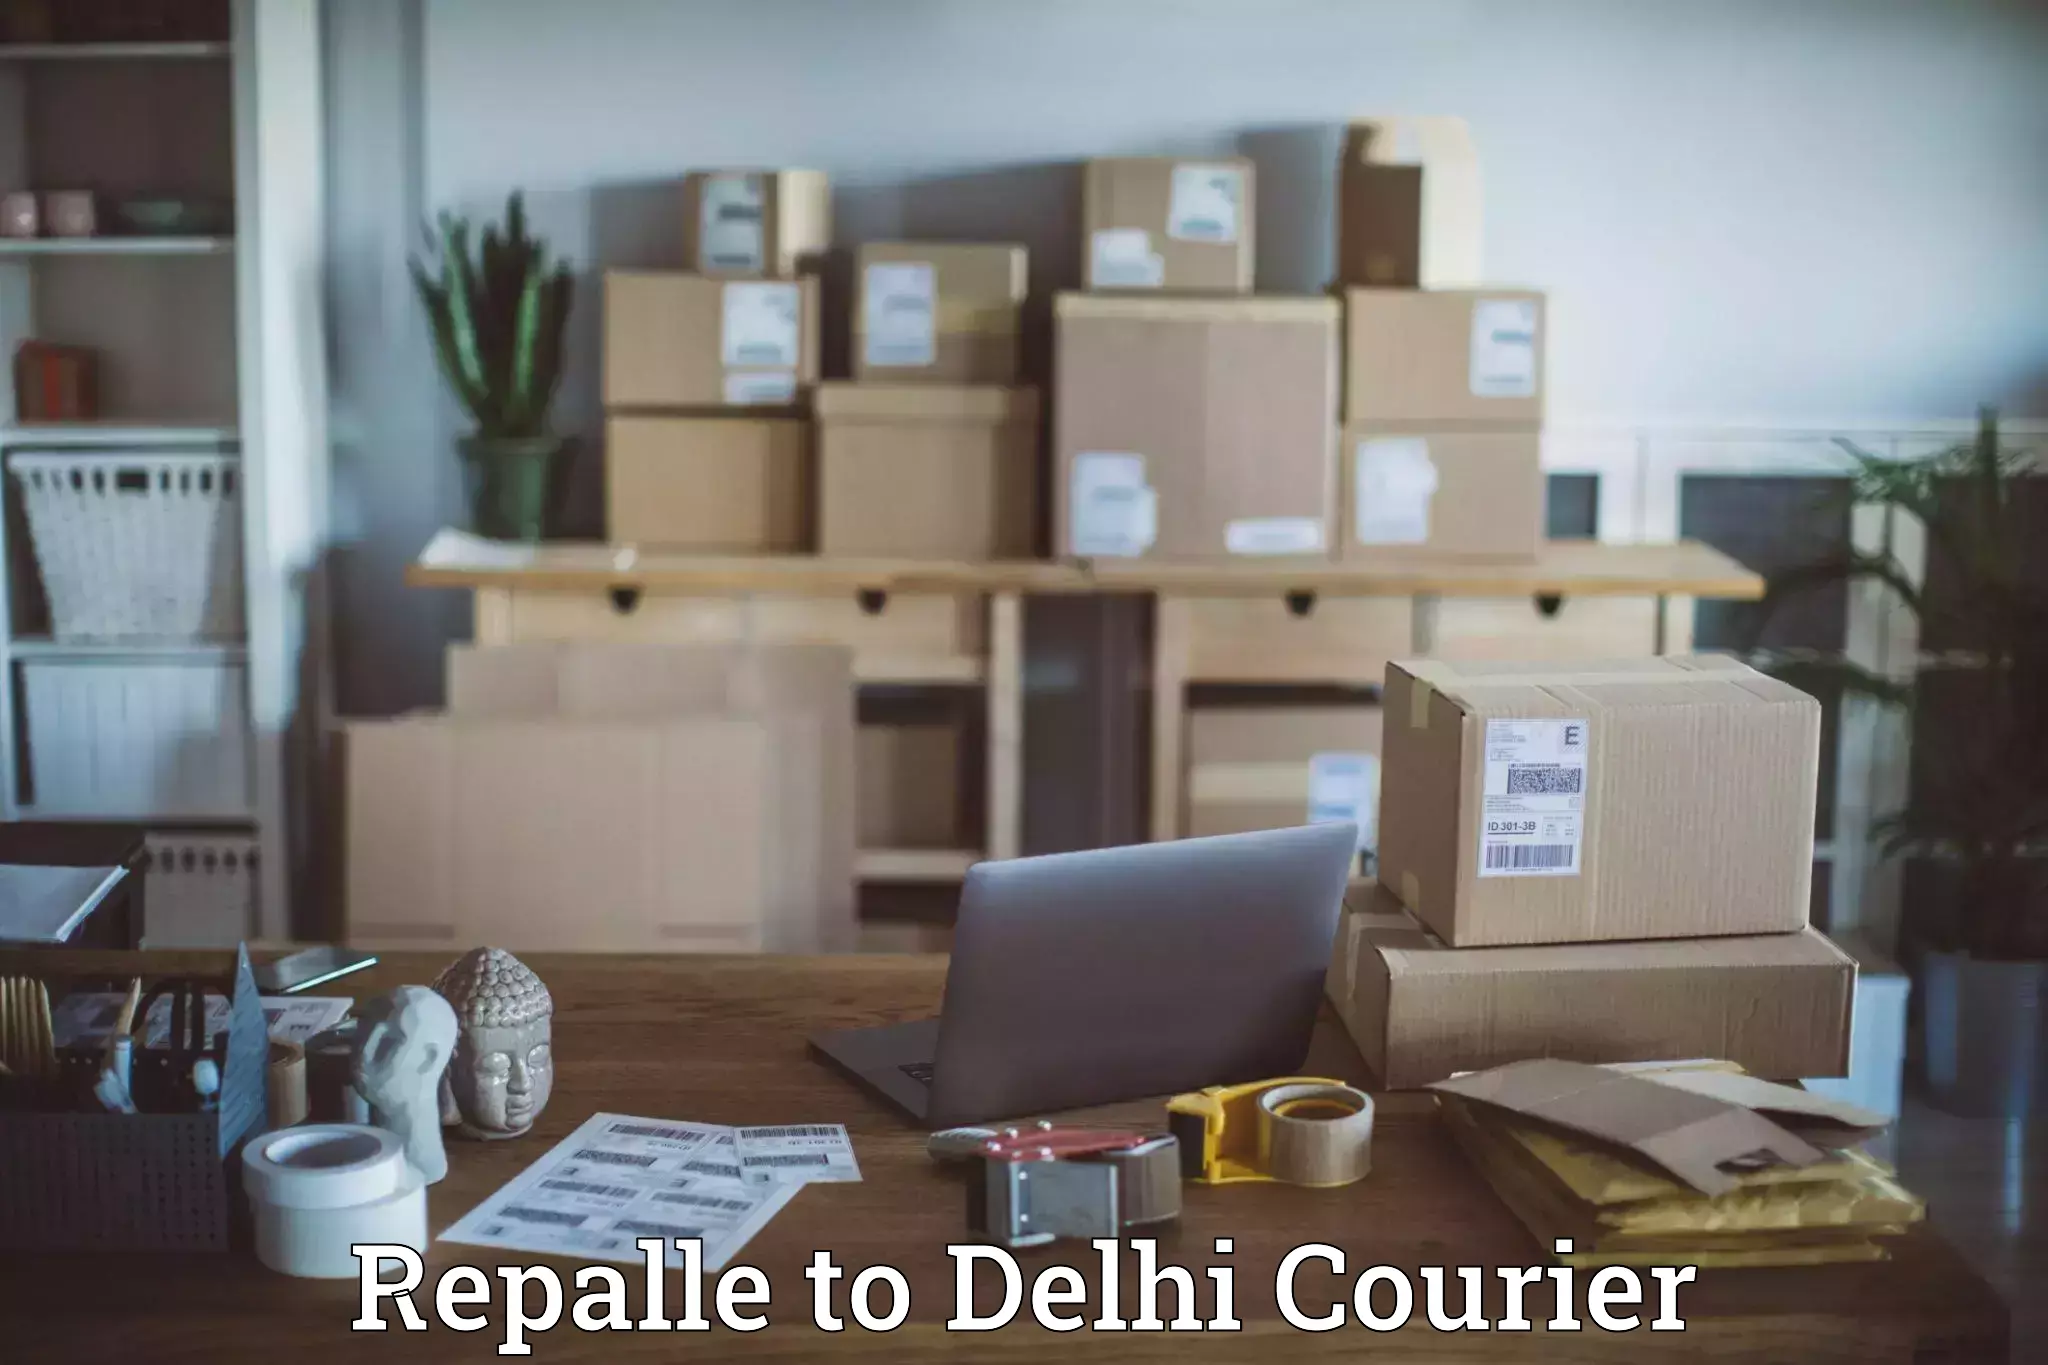 Residential courier service Repalle to Delhi